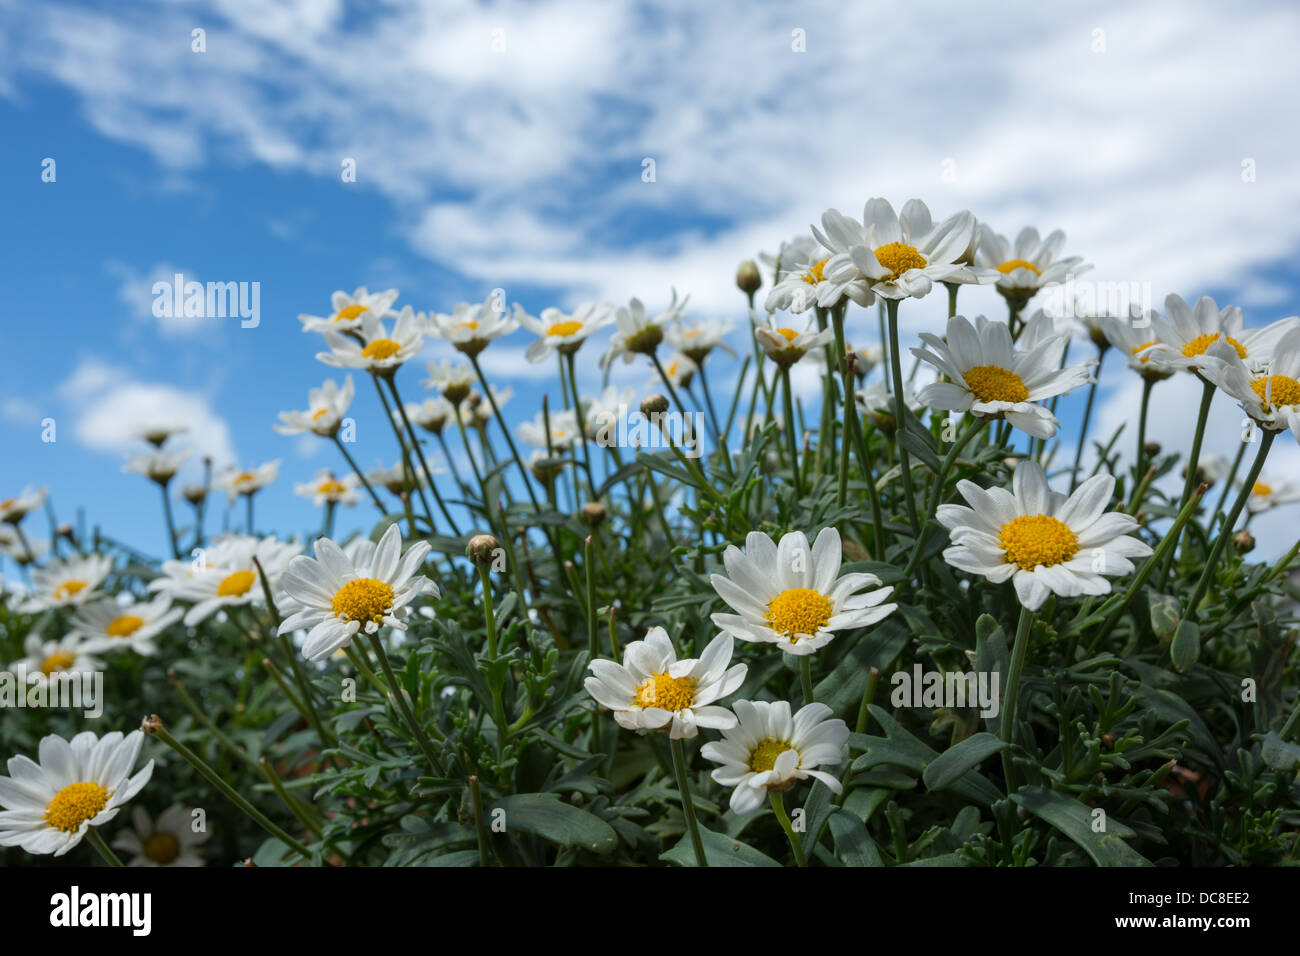 Bright white daisies against a summer sky. Stock Photo